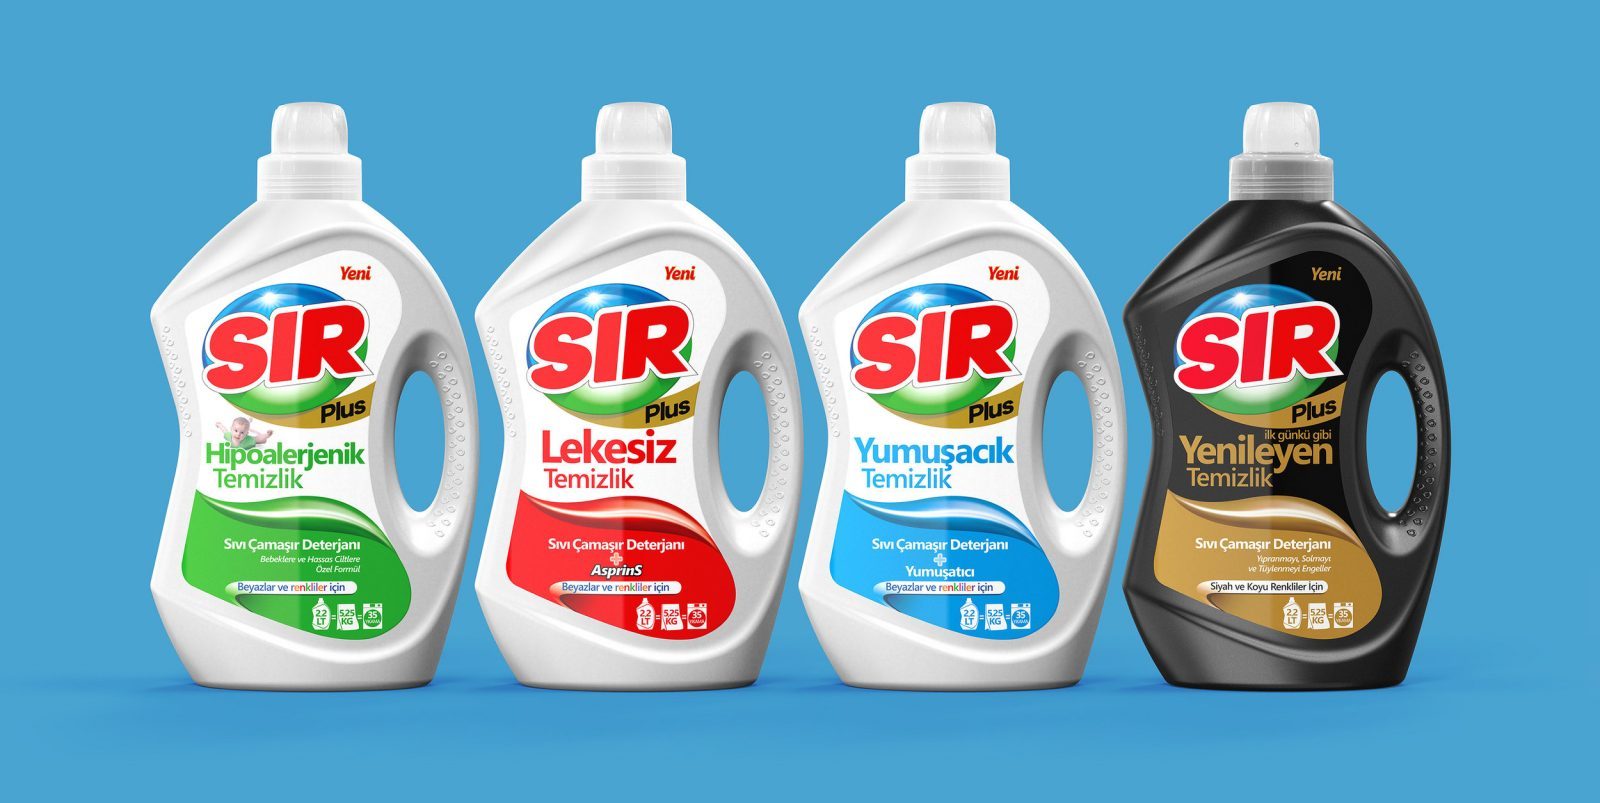 Re-branding And Packaging Design For Liquid Laundry Detergent From Turkey